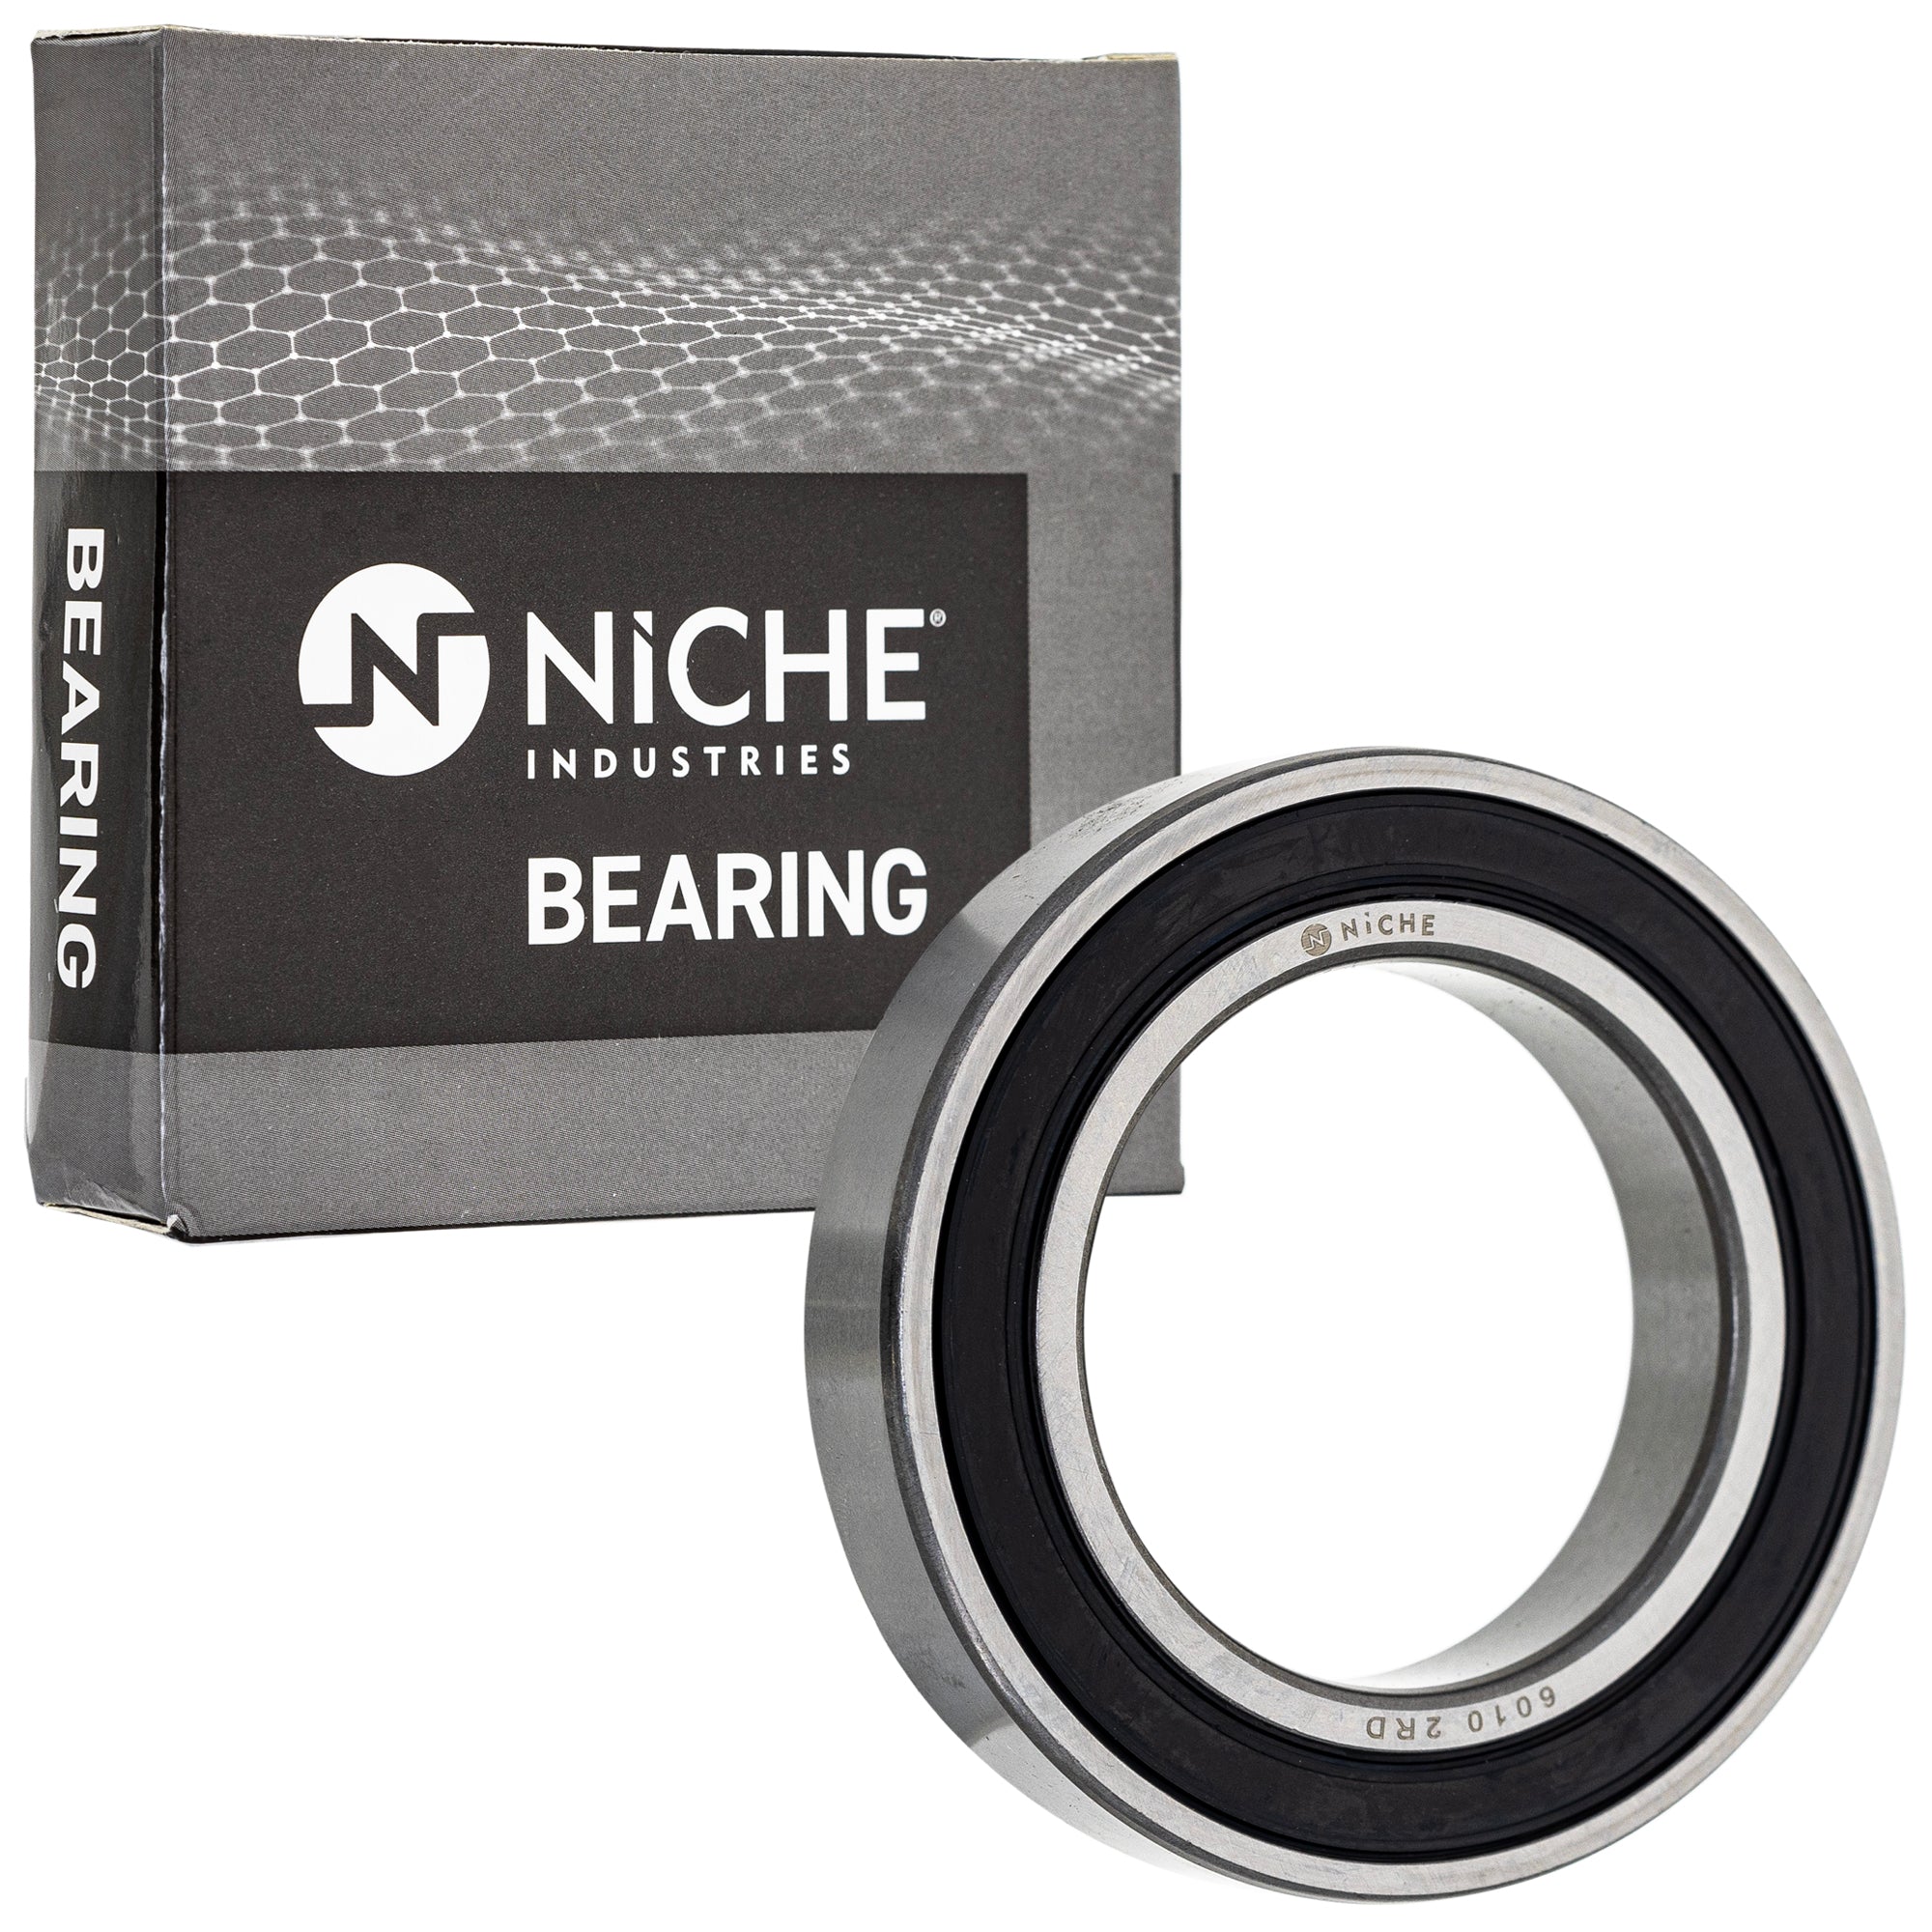 NICHE 519-CBB2272R Bearing 2-Pack for zOTHER TRX300 SporTrax